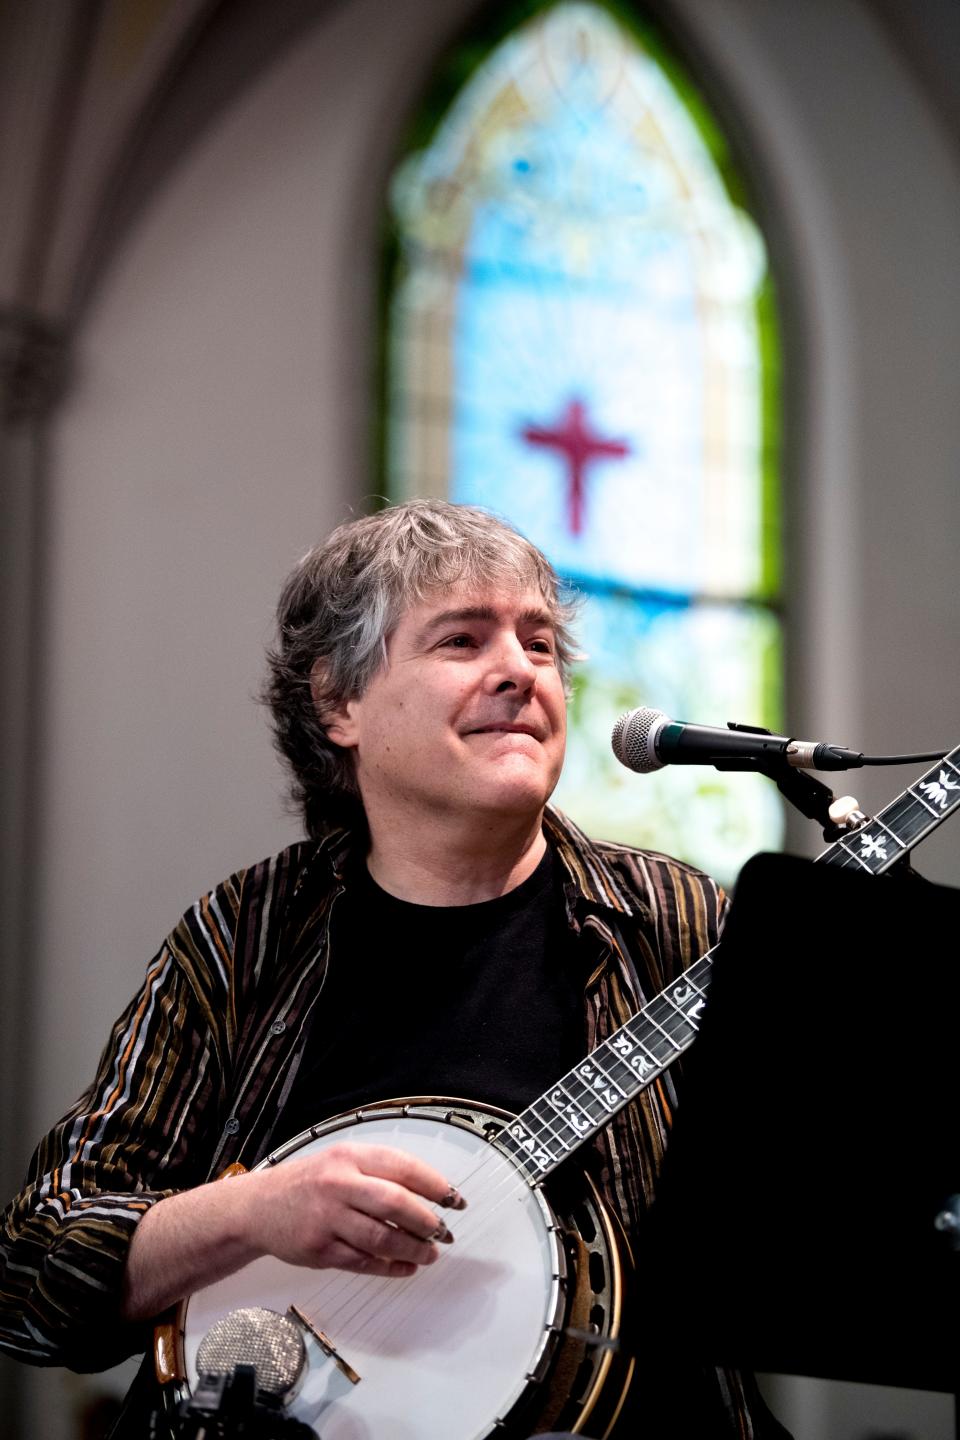 Bela Fleck is shown here performing with Edmar Castaneda at St. John's Episcopal Church during Big Ears Festival 2019 in Knoxville, Tenn., in 2019. Fleck is among the stars performing in Longwood Gardens' concert series this summer.